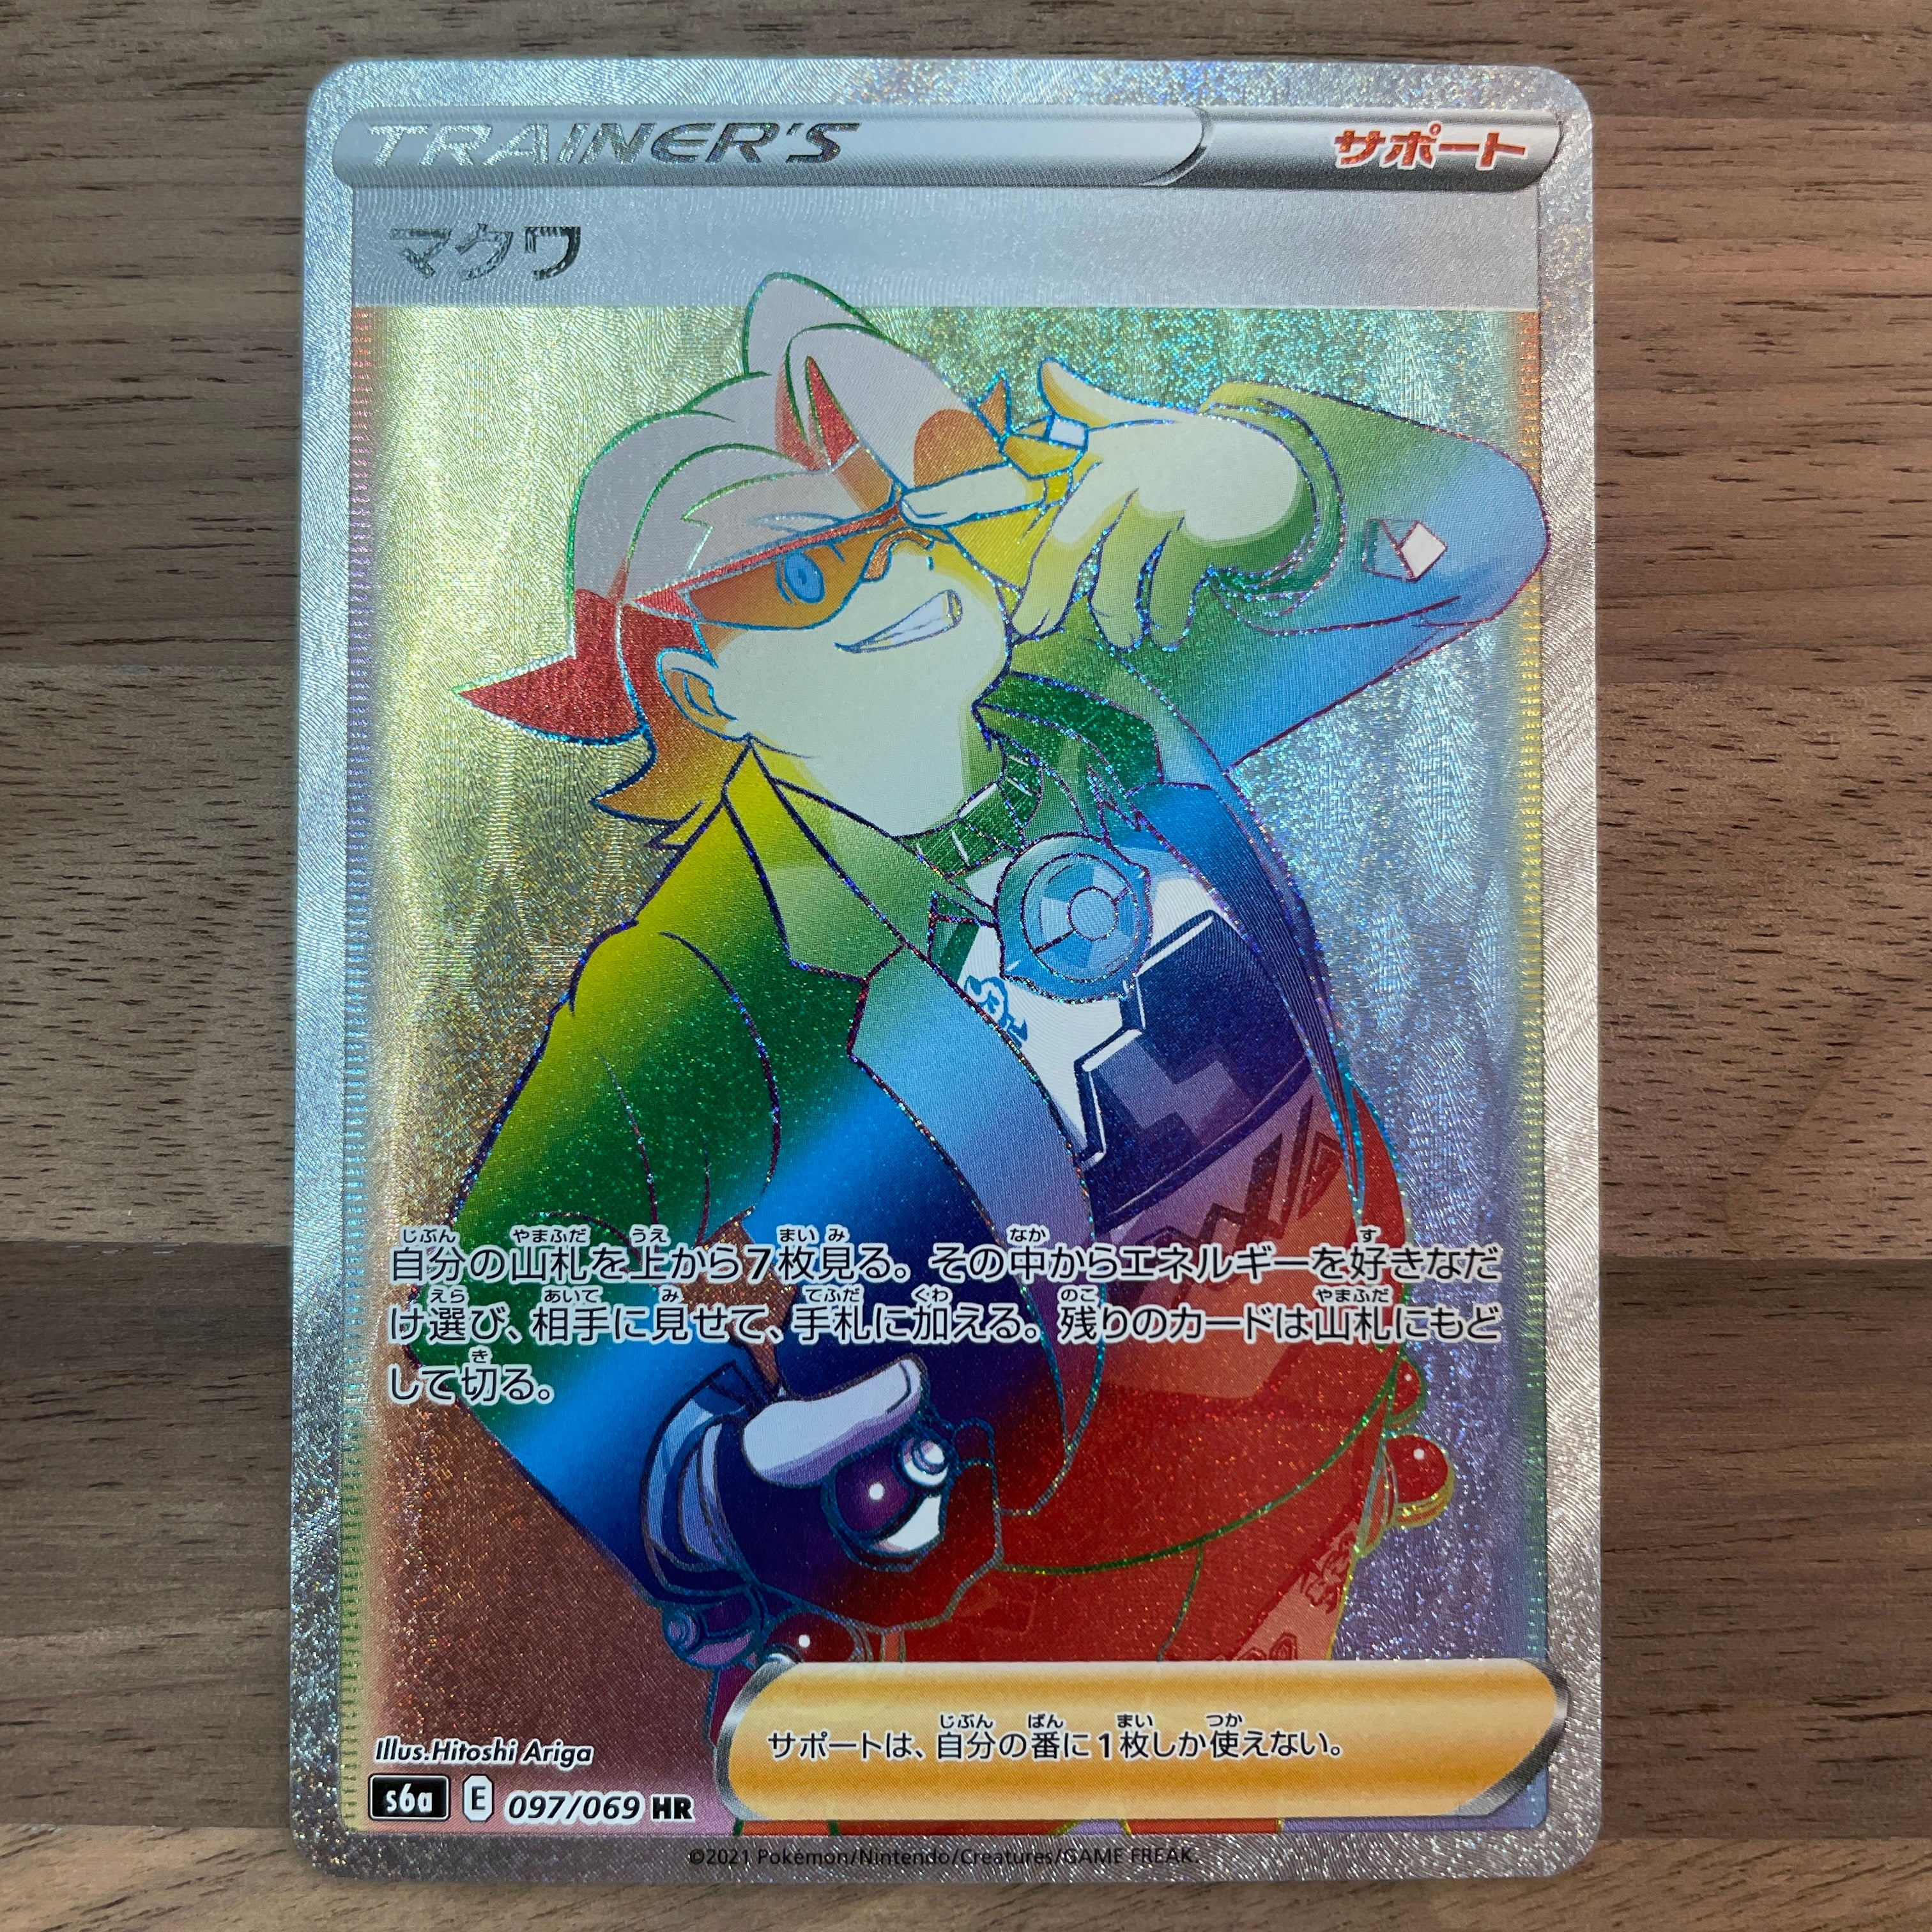 POKÉMON CARD GAME Sword & Shield Expansion pack ｢Eevee Heroes｣  POKÉMON CARD GAME s6a 097/069 Hyper Rare card  Gordie